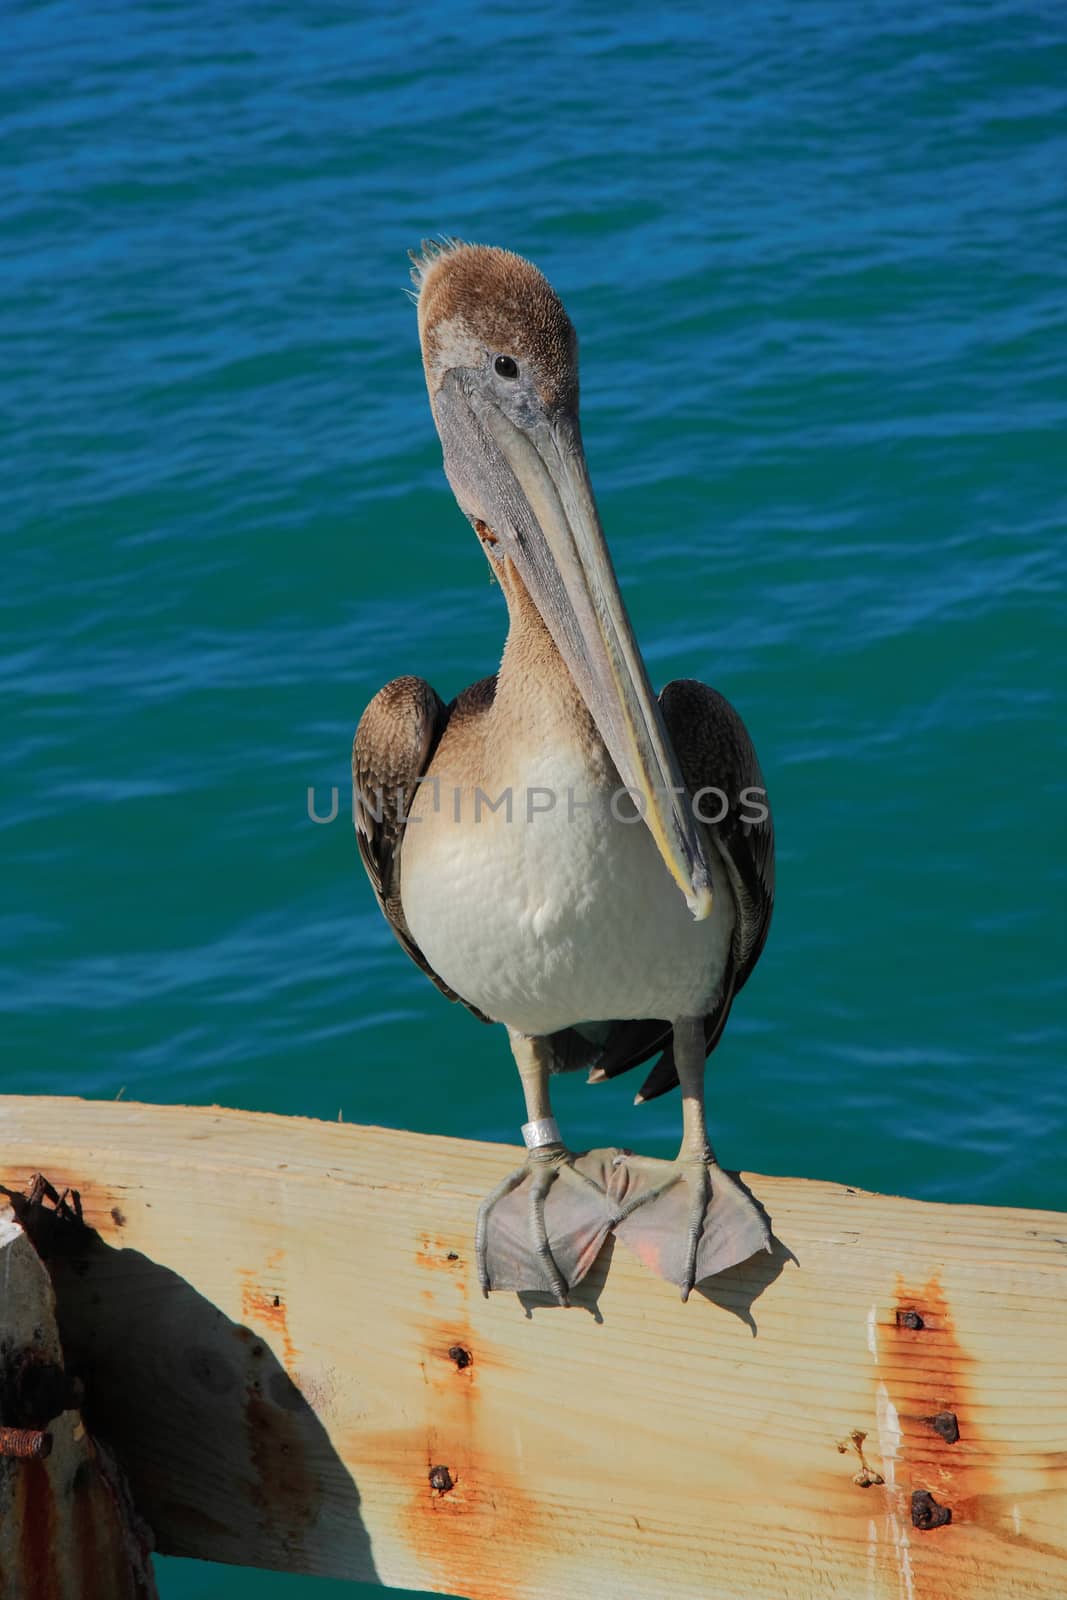 Key west's pelican wait to cach the fish